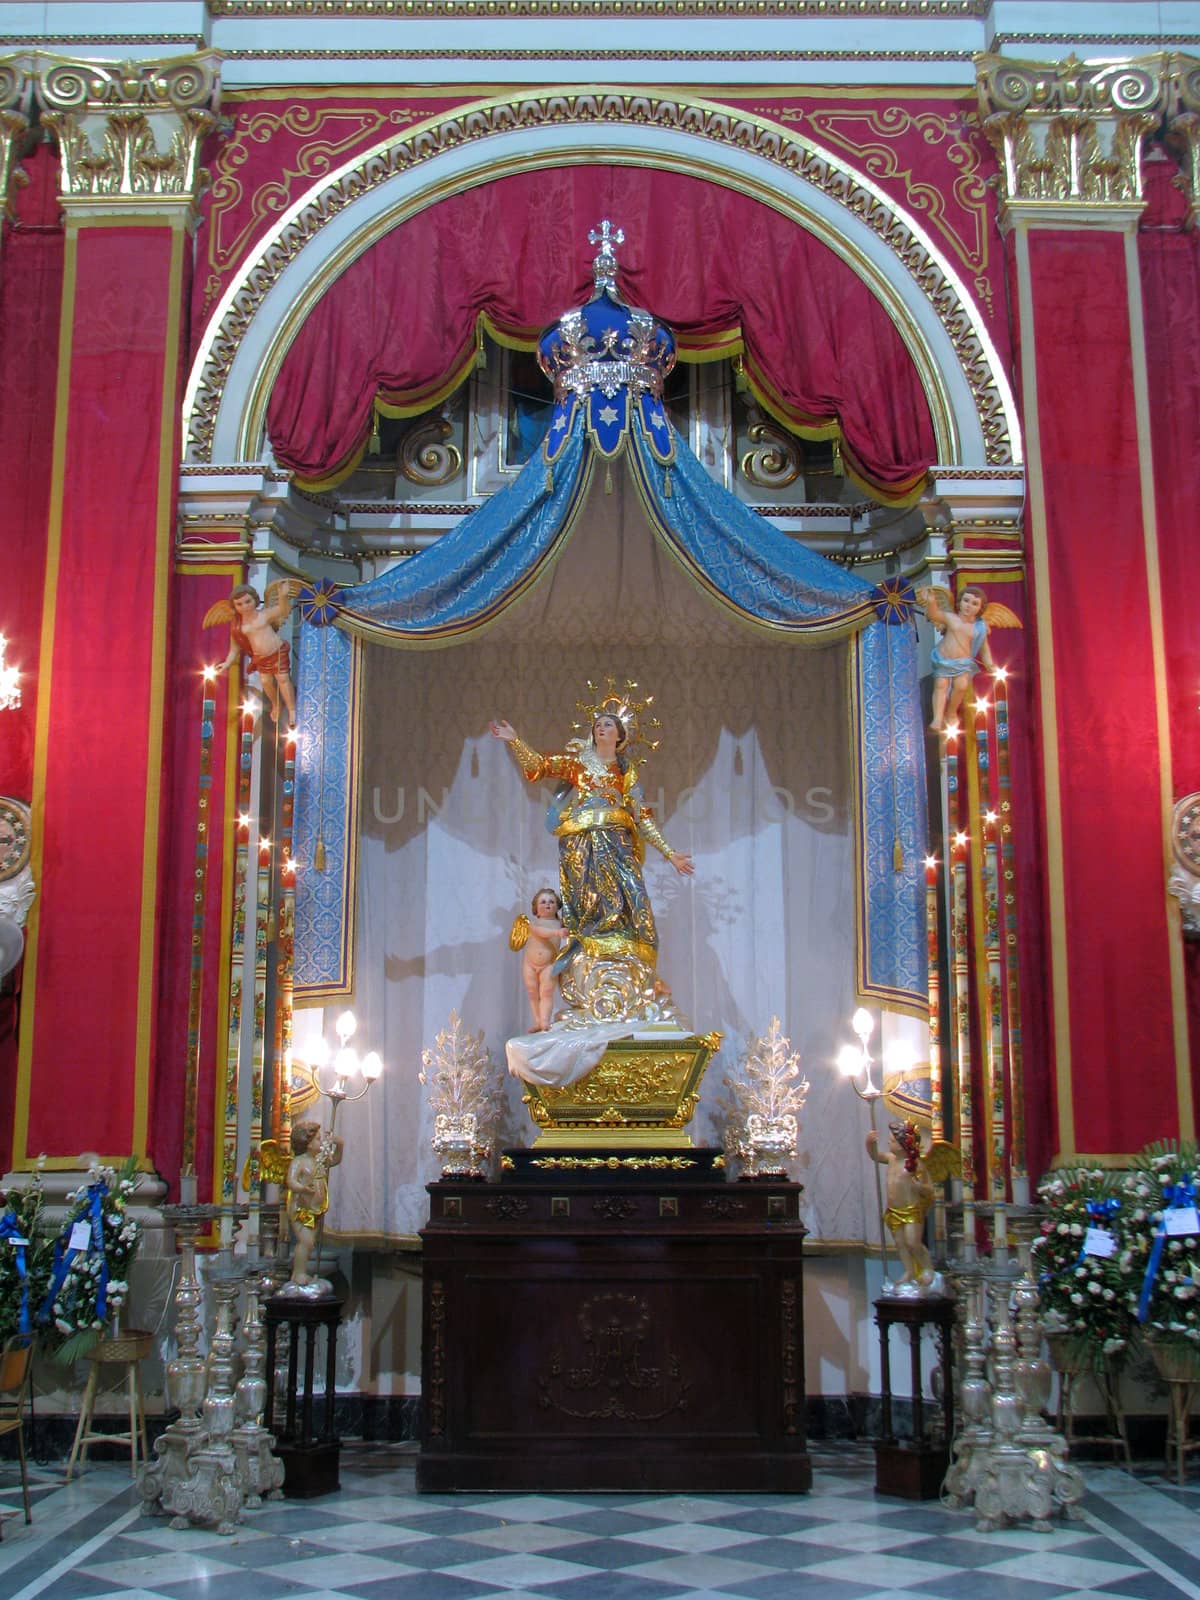 The statue of The Assumption of the Blessed Virgin Mary, at Ghaxaq, Malta.